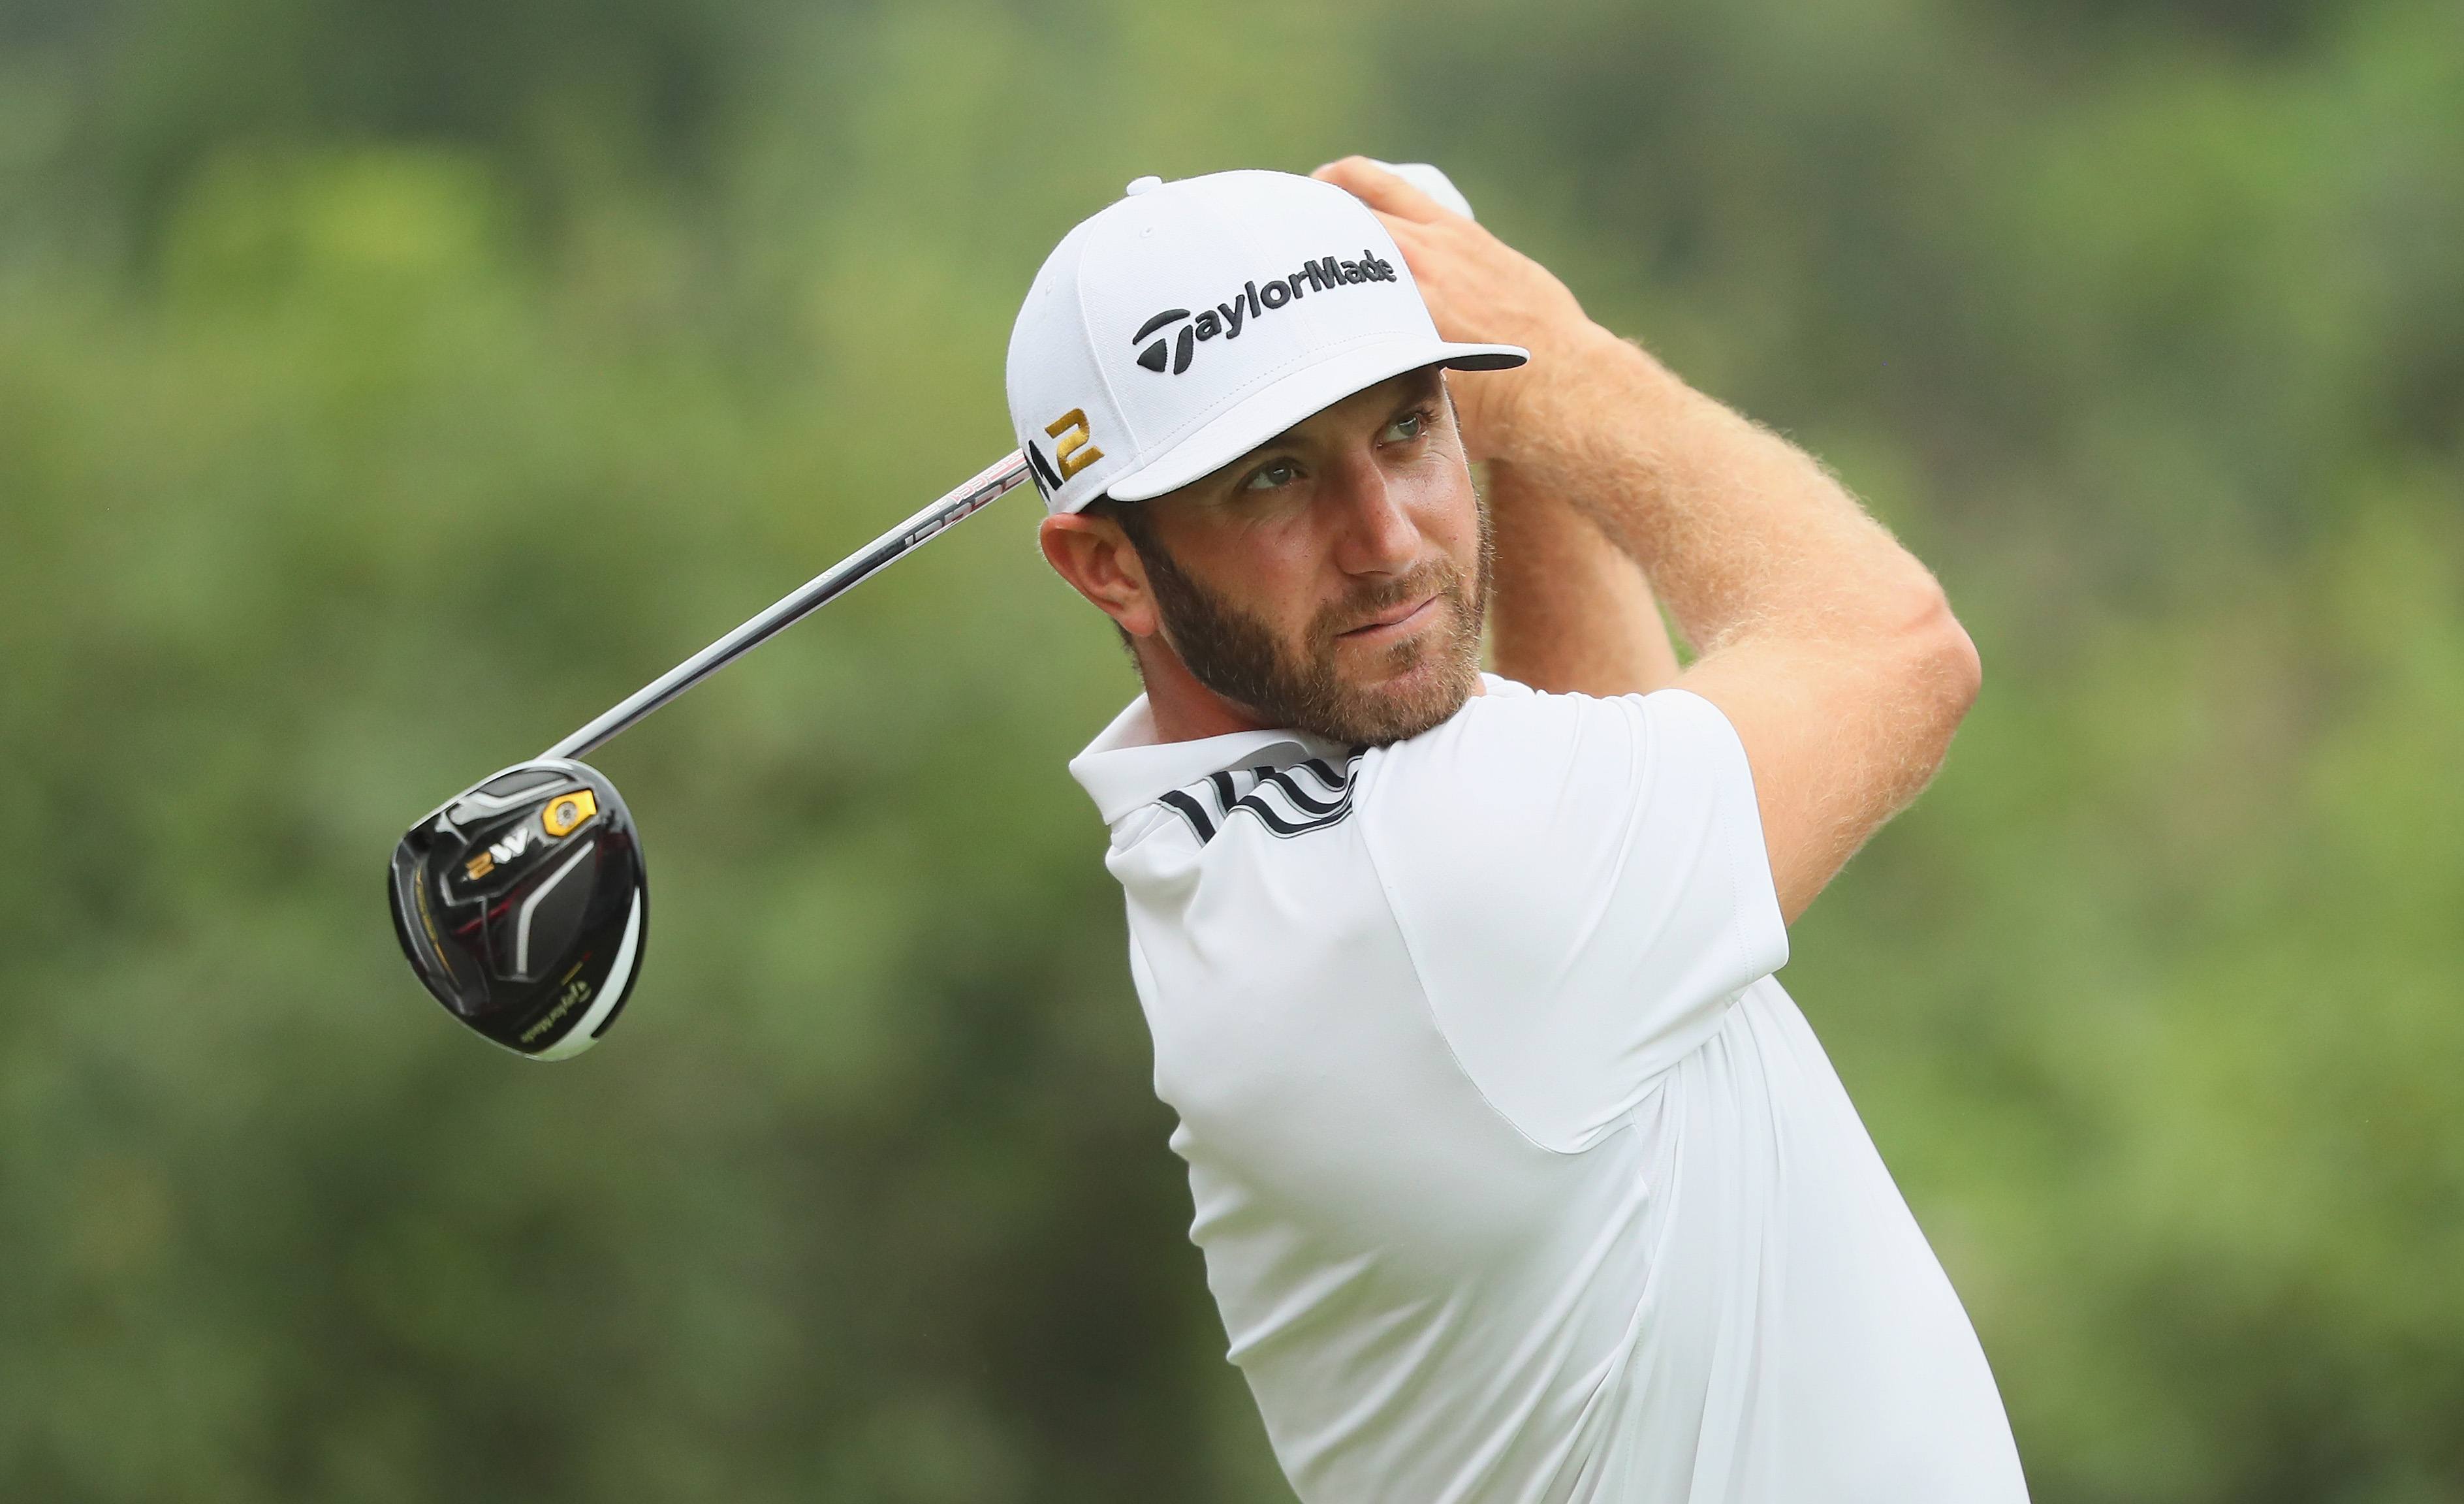 SHANGHAI, CHINA - OCTOBER 26: Dustin Johnson of the USA in action during the Pro Am prior to the start of the WGC - HSBC Champions at the Sheshan International Golf Club on October 26, 2016 in Shanghai, China. (Photo by Andrew Redington/Getty Images)